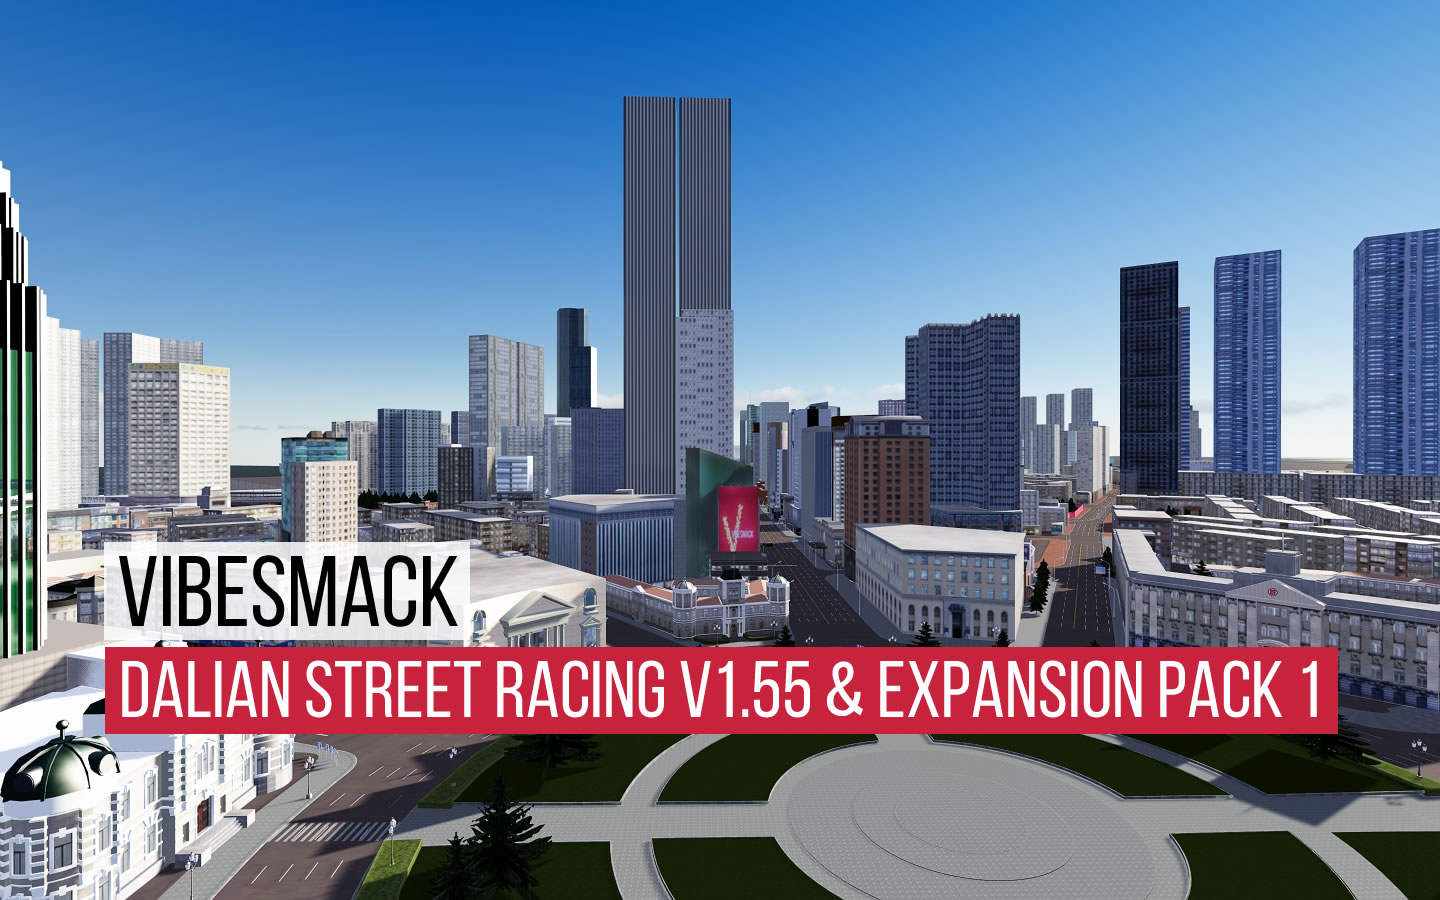 Street Racing Dalian Expansion Pack1 - Digital Race Track for Assetto Corsa